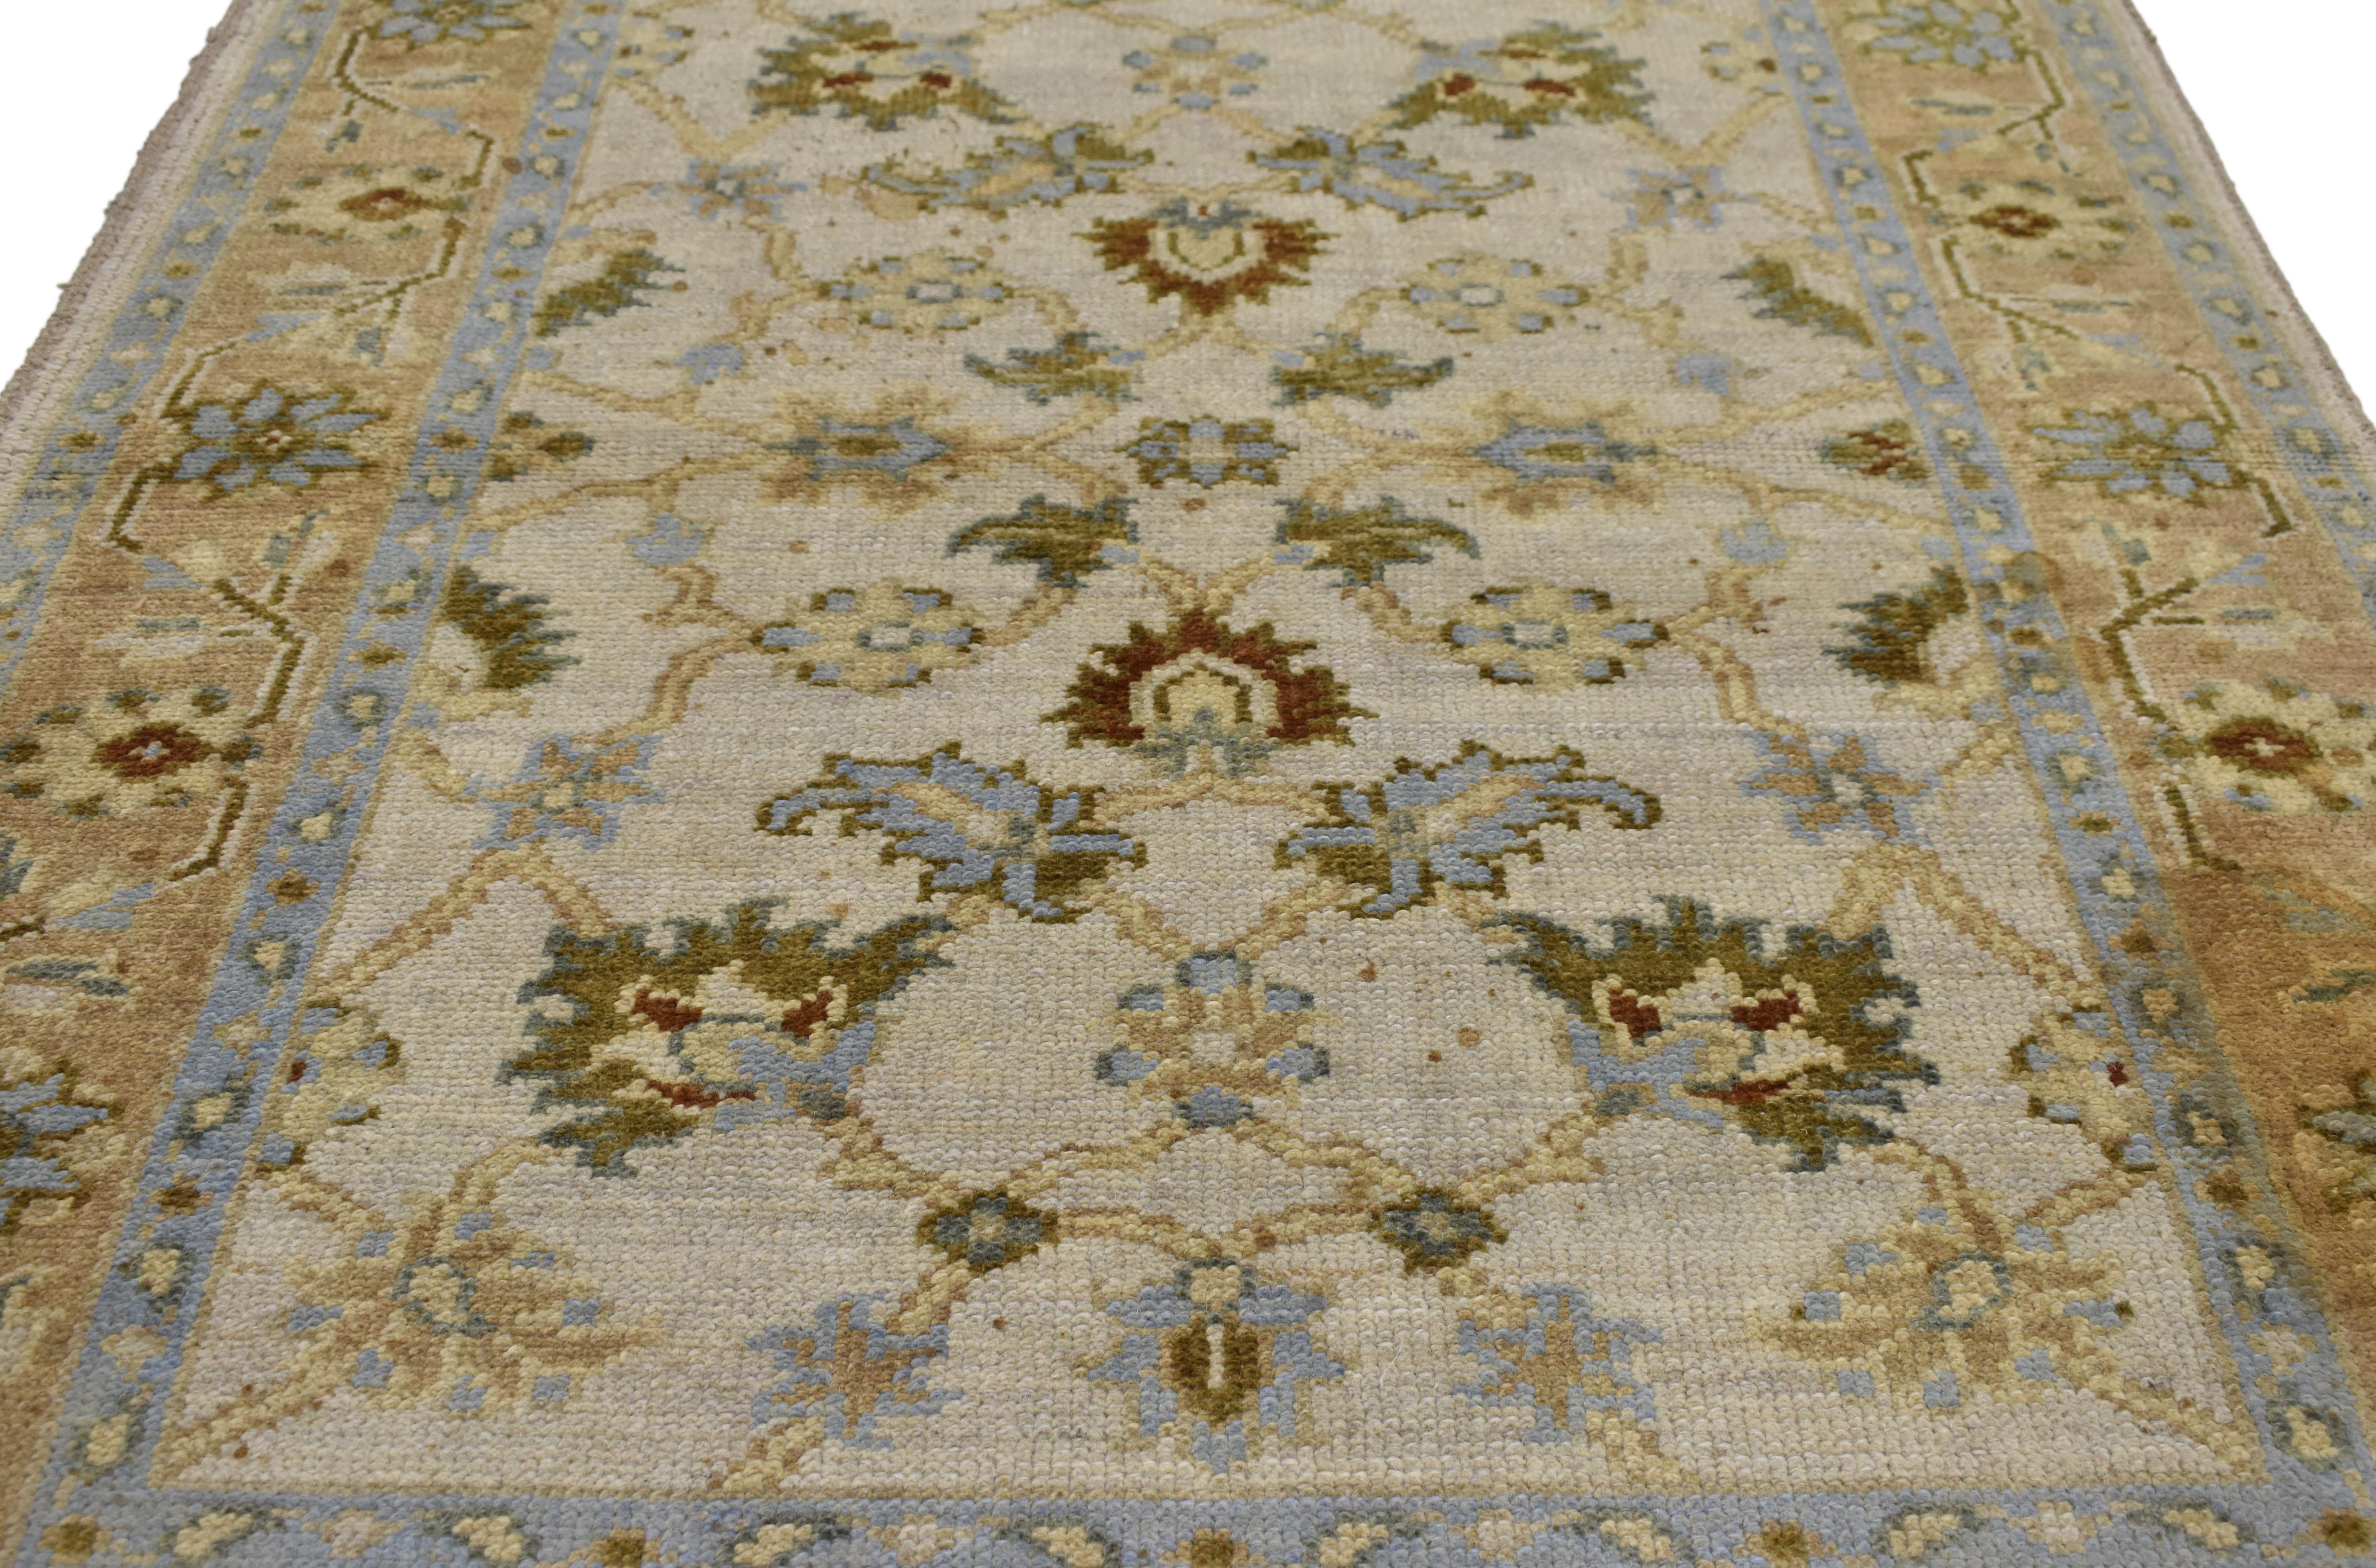 74641, vintage Persian style Garden rug, accent rug with Georgian Queen Anne style. This hand knotted wool vintage Persian style Indian accent rug features an all-over floral lattice pattern composed of blooming lotus palmettes, tulips, lilies,